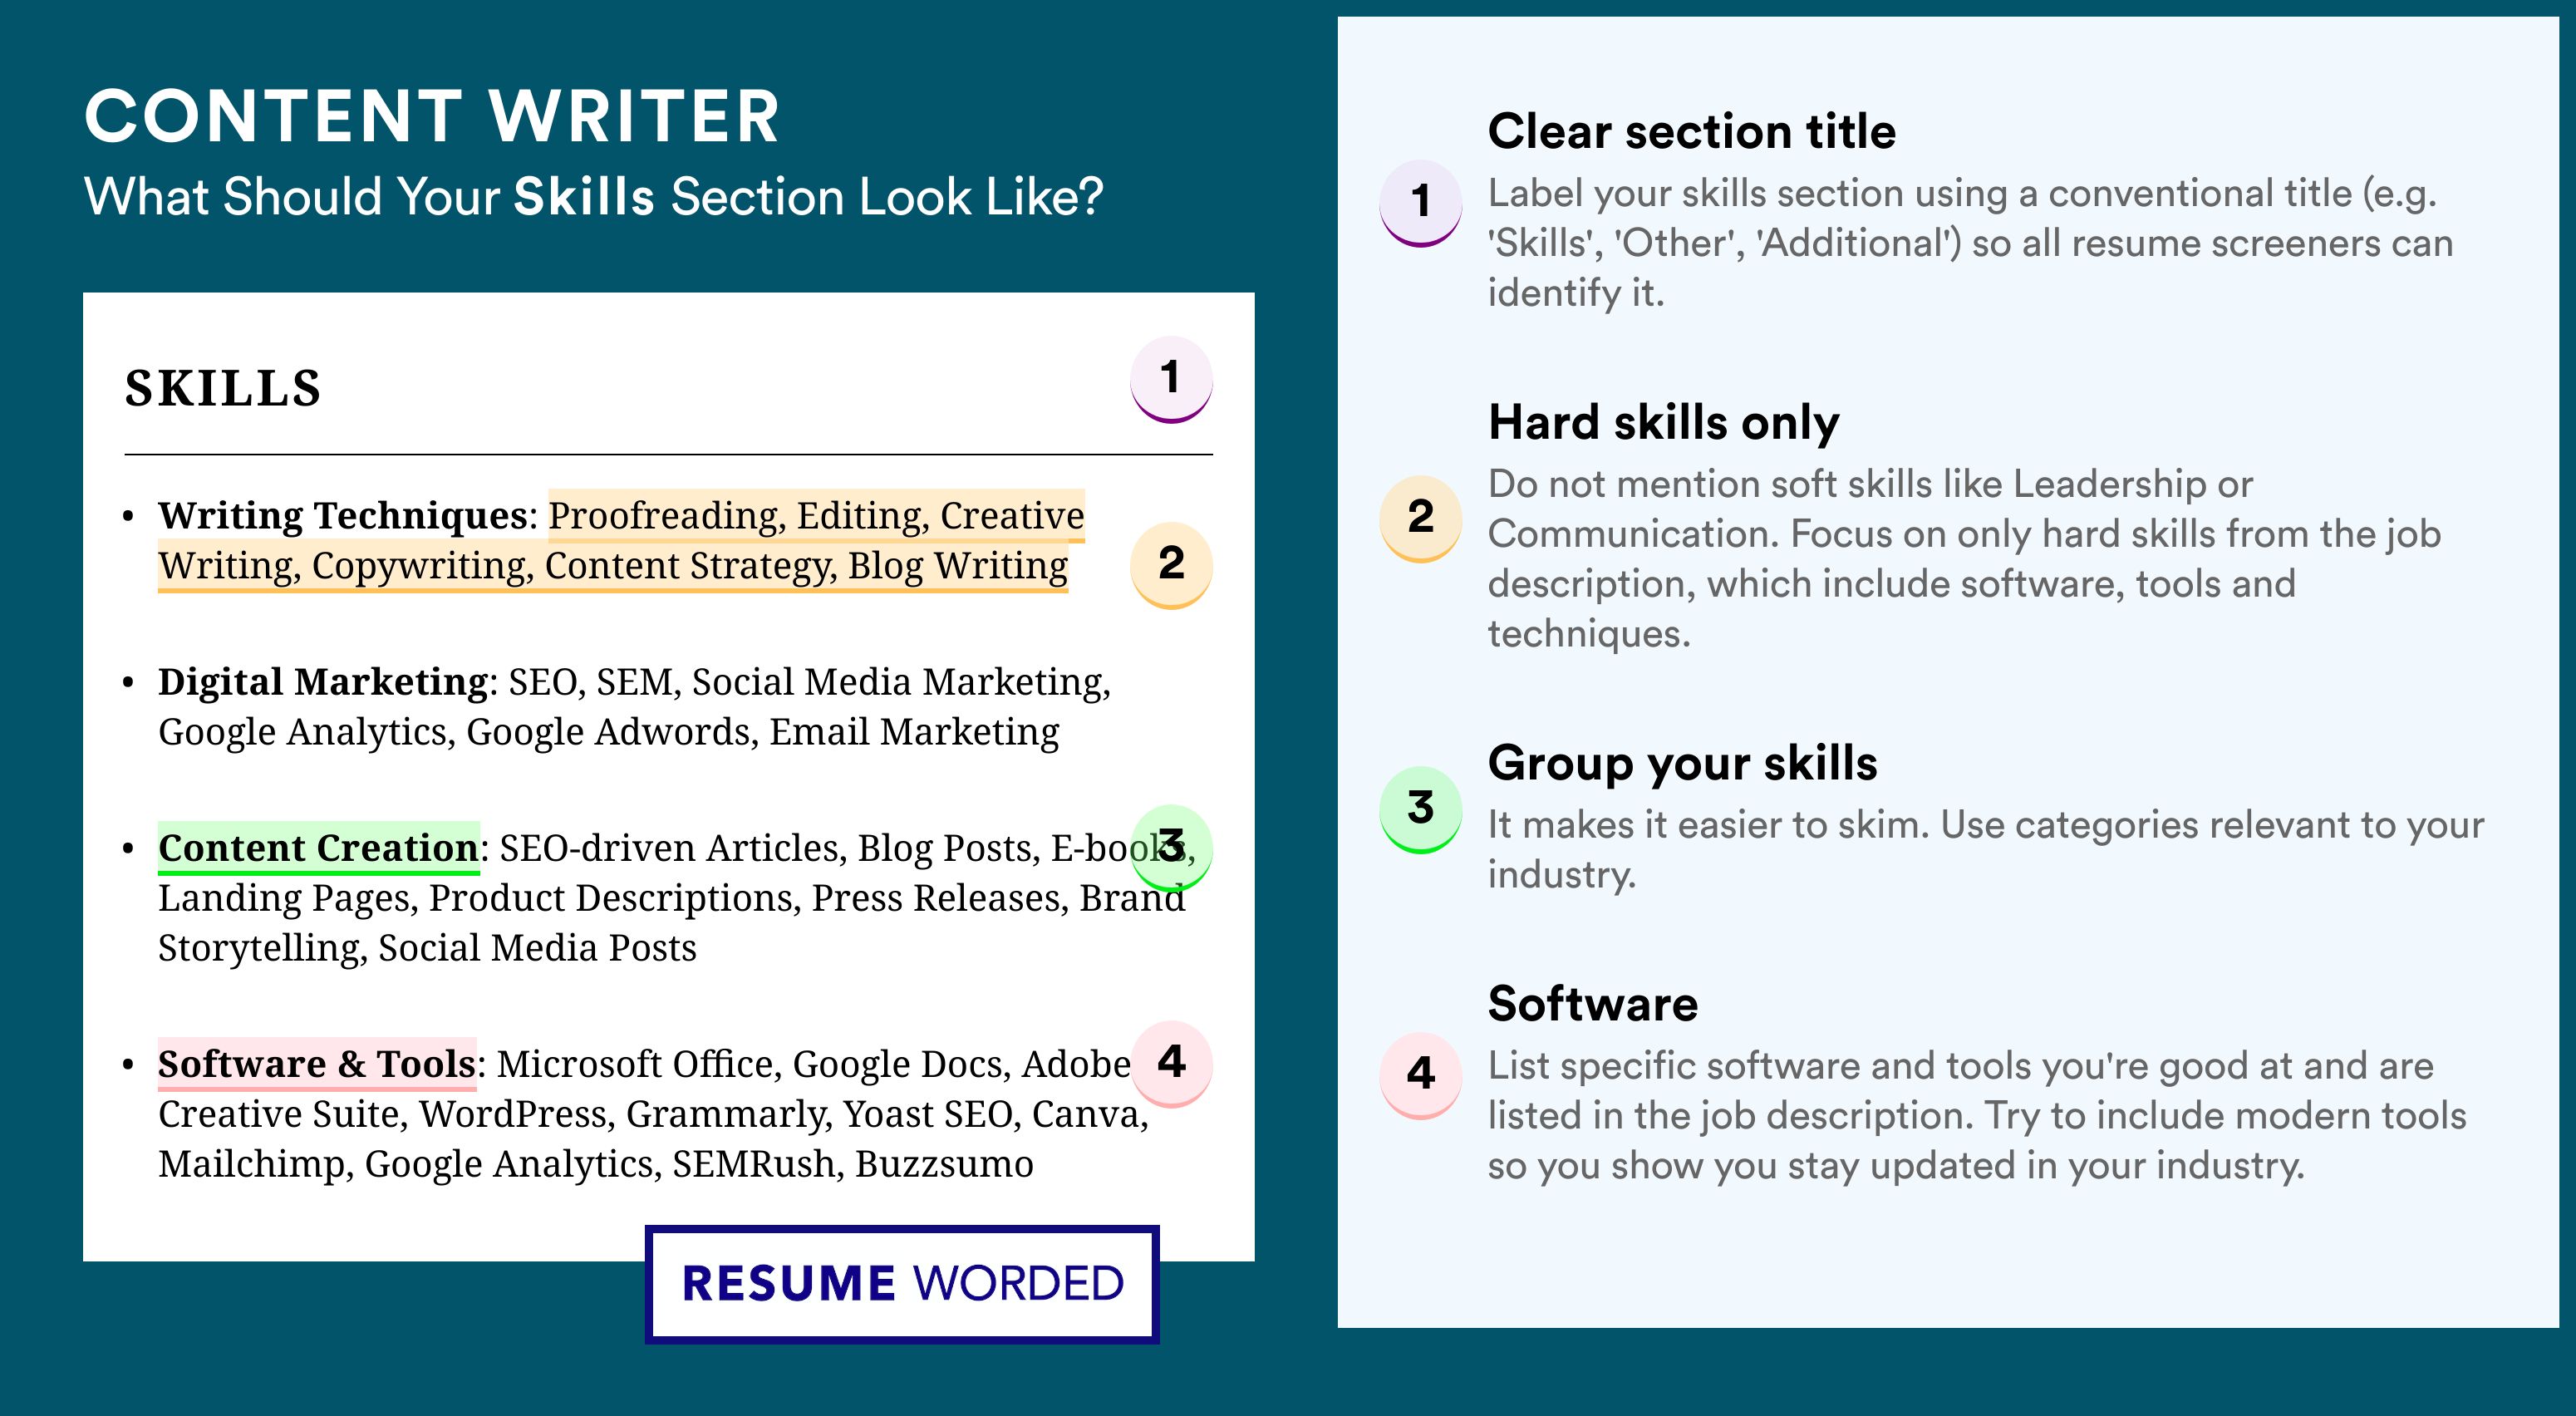 How To Write Your Skills Section - Content Writer Roles